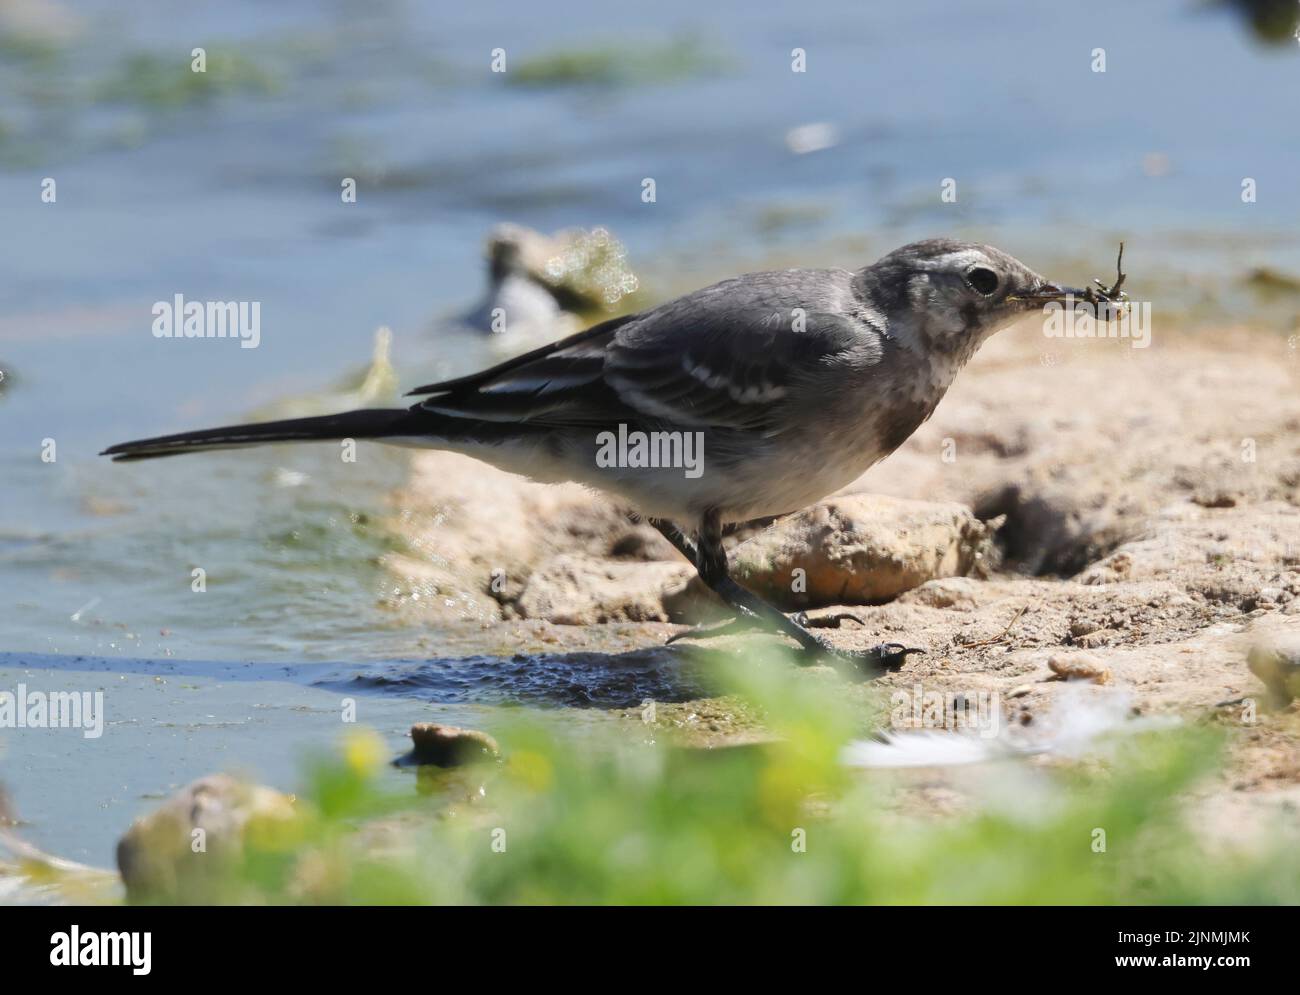 A juvenile Pied Wagtail being careful with its catch of a Bee Stock Photo